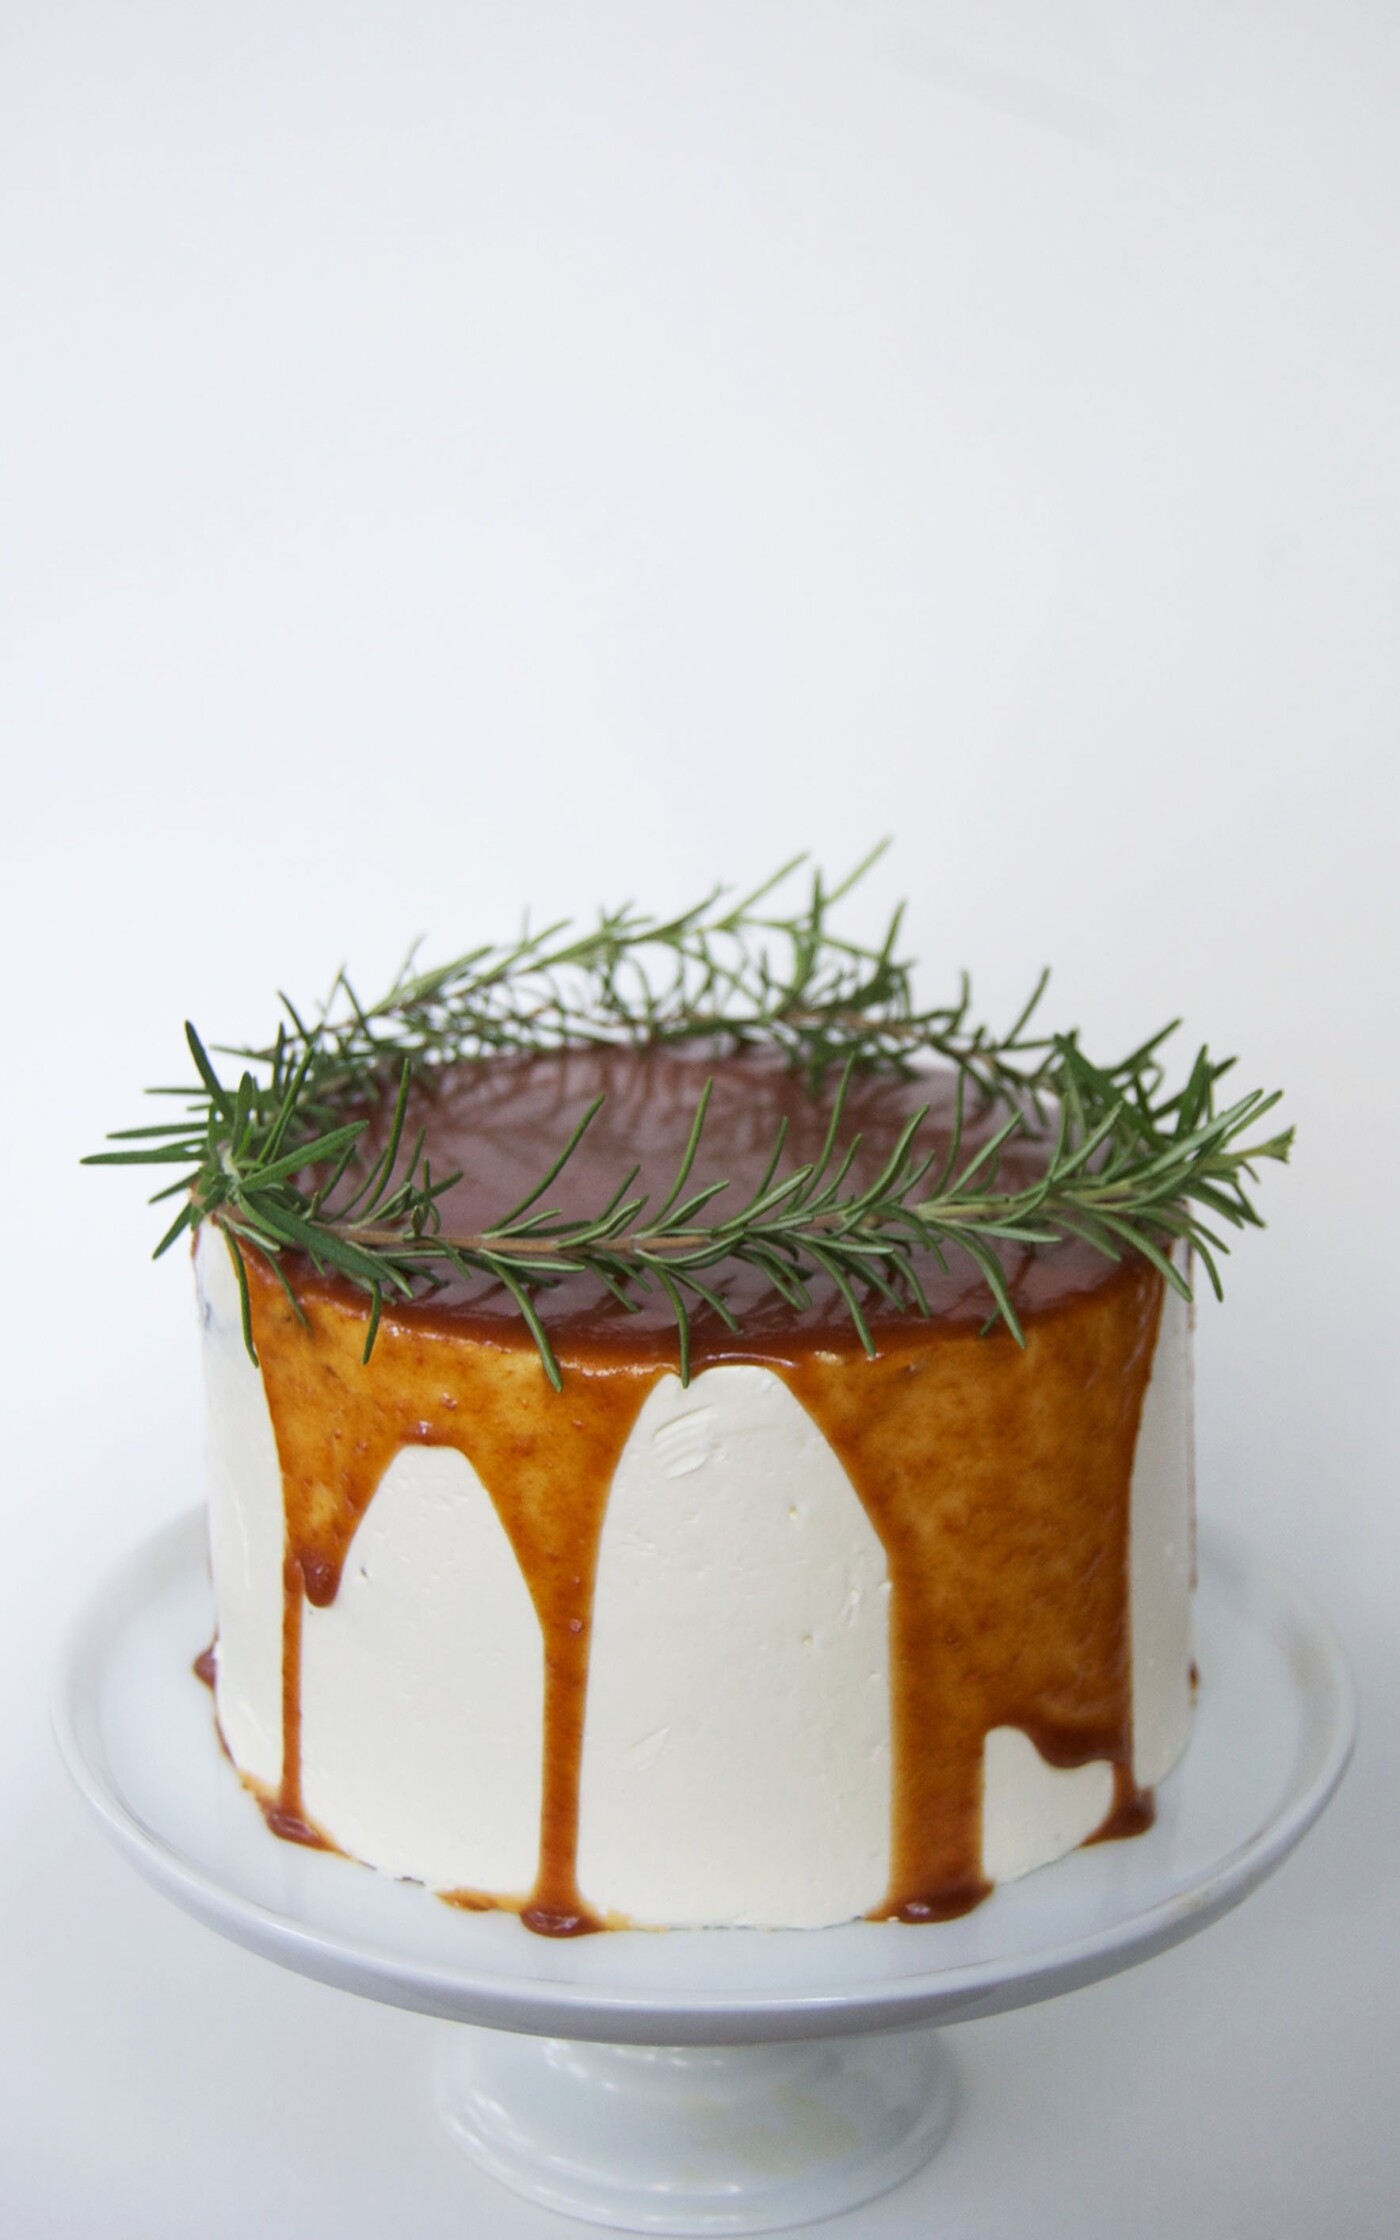 In the language of flowers, rosemary is emblematic of remembrance, so this caramel cake is topped with a halo of rosemary as a way to remember and honor my grandmother. Since her name was Rose — another flower — I feel that it carries extra meaning. She was an outstanding baker, and specialized in jumbo caramel rolls, so I know she would have liked this cake. 